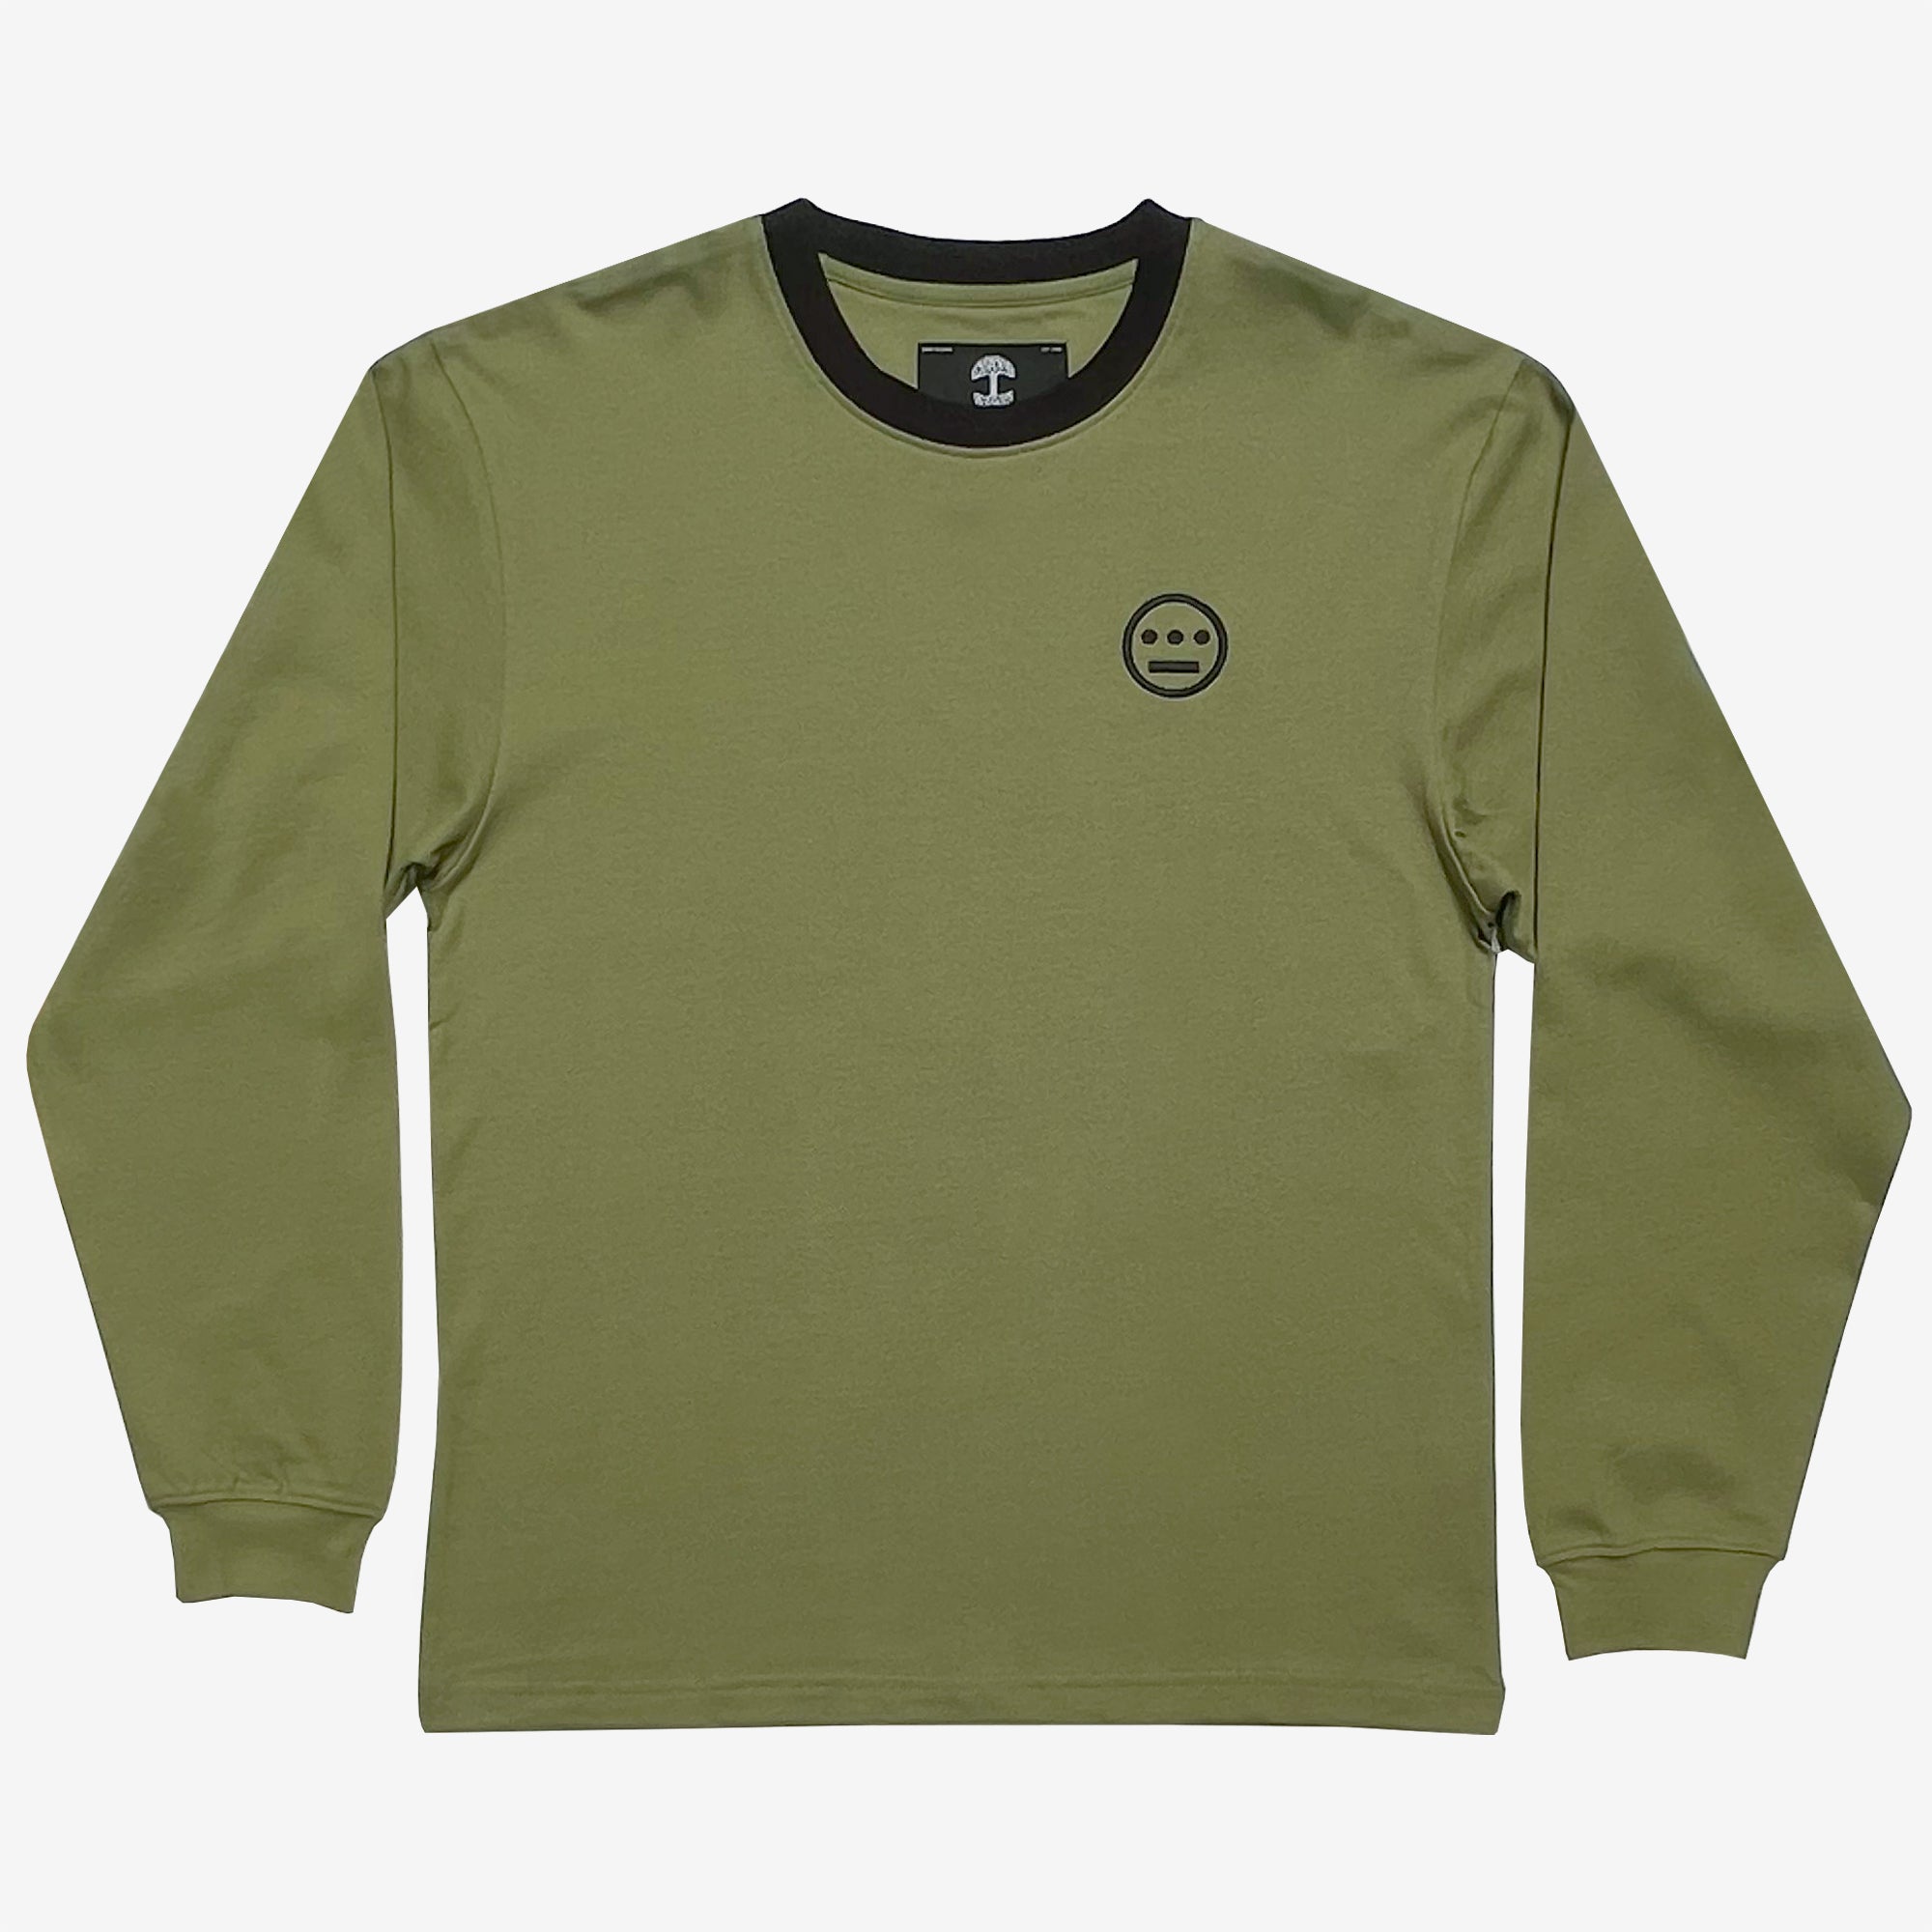 Army green long sleeve crew neck tee with black Hieroglyphics hip-hop logo on left chest wear side and black trim on neck.